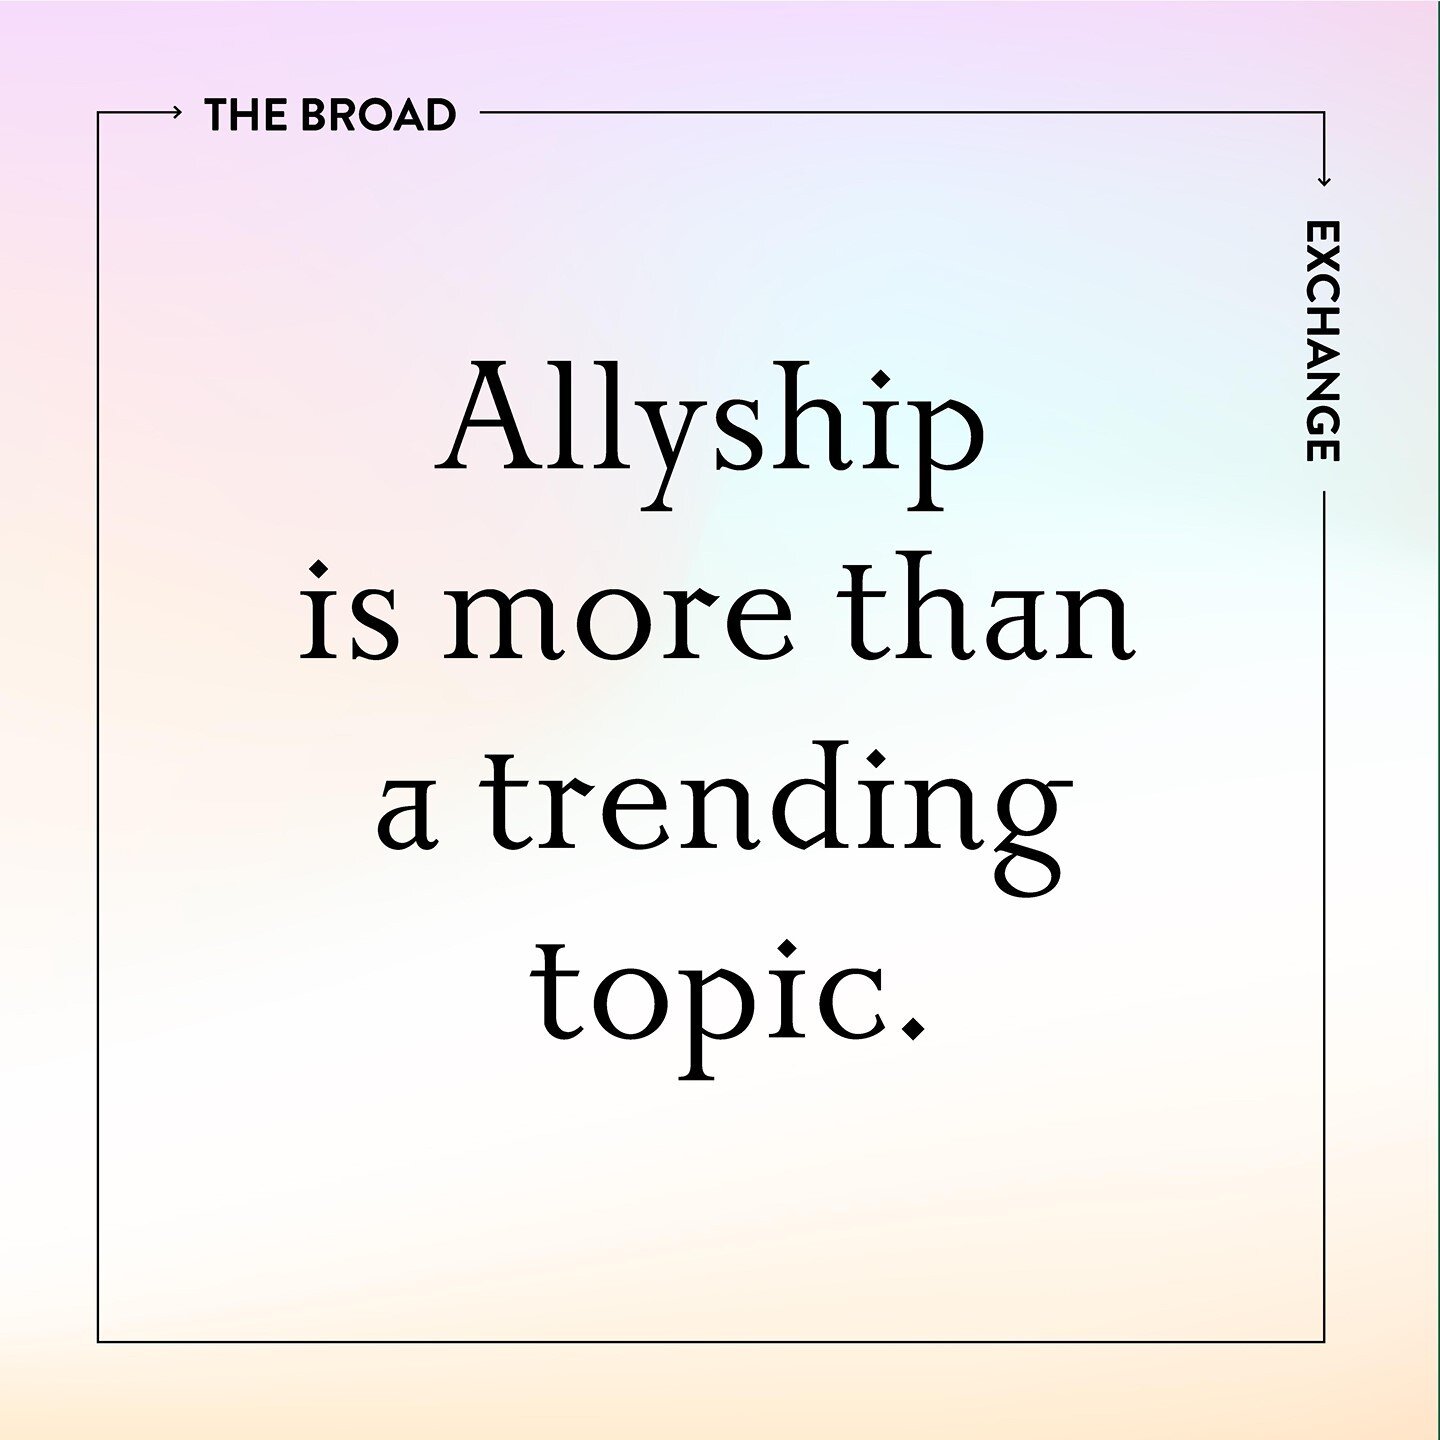 Allyship is a practice, and a necessity for everyone striving to connect more sympathetically and compassionately with others. It requires the ally to acknowledge their position of relative privilege and use that power to help those that experience m